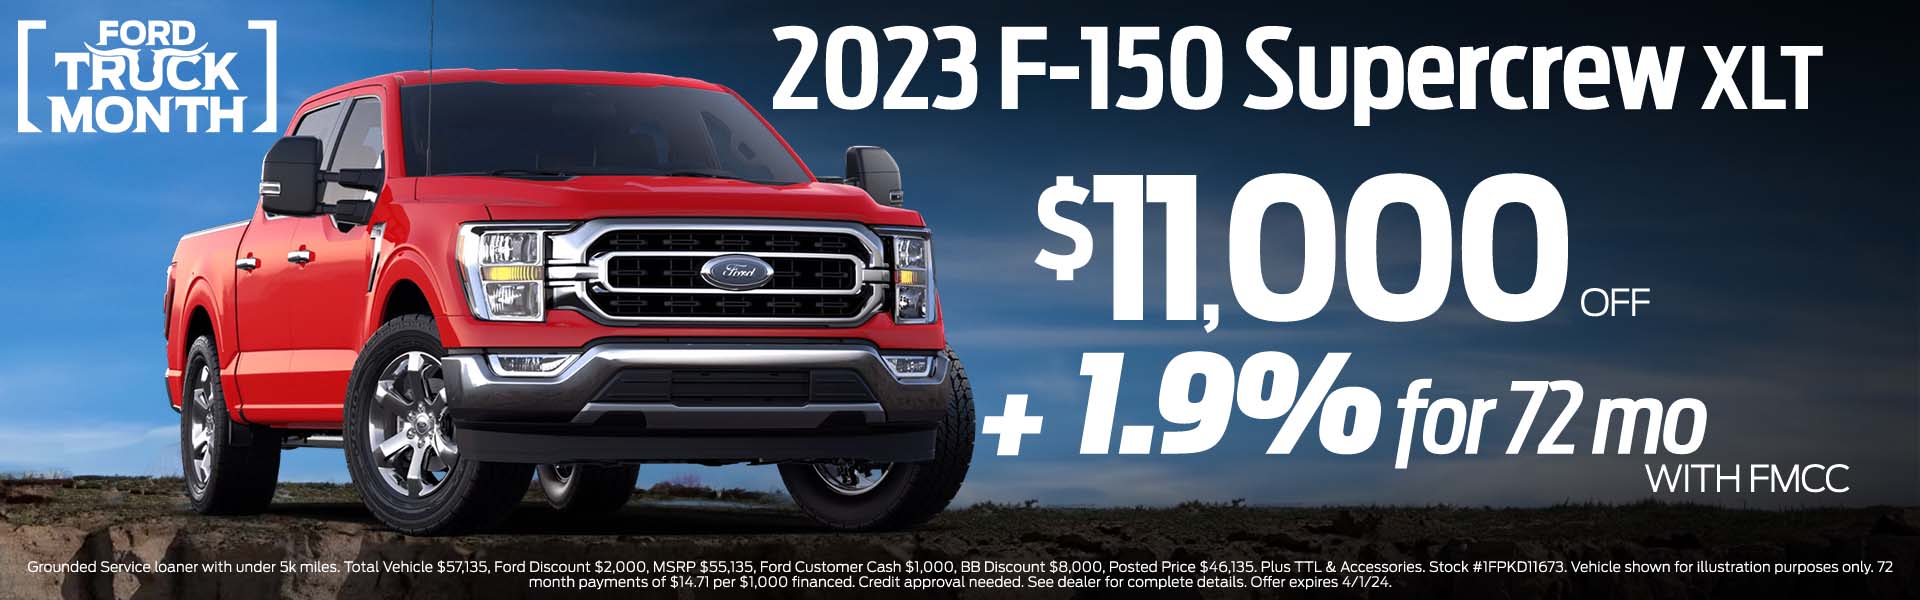 $11,000 off with FMCC F-150. 1.9% APR available